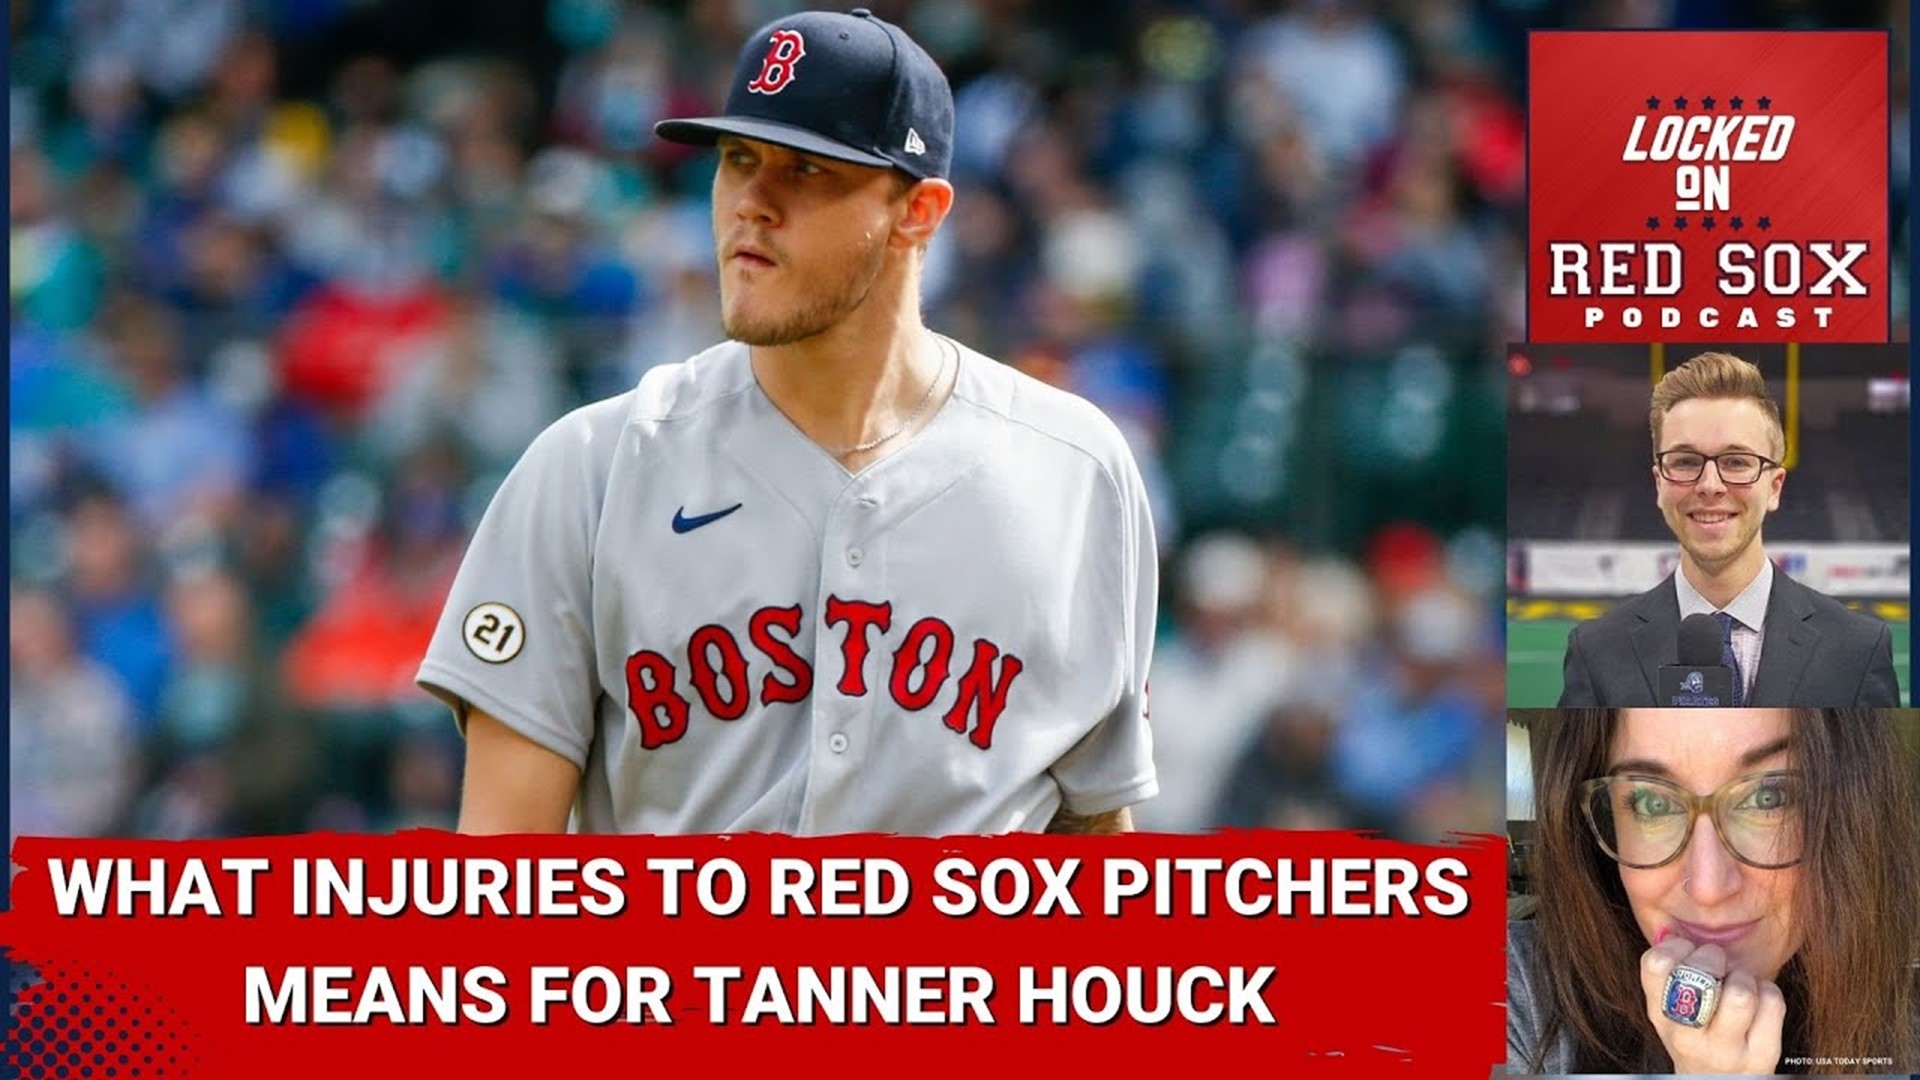 With the Boston Red Sox facing some injuries to their pitchers who likely won't be ready for Opening Day, who could replace them on the roster?